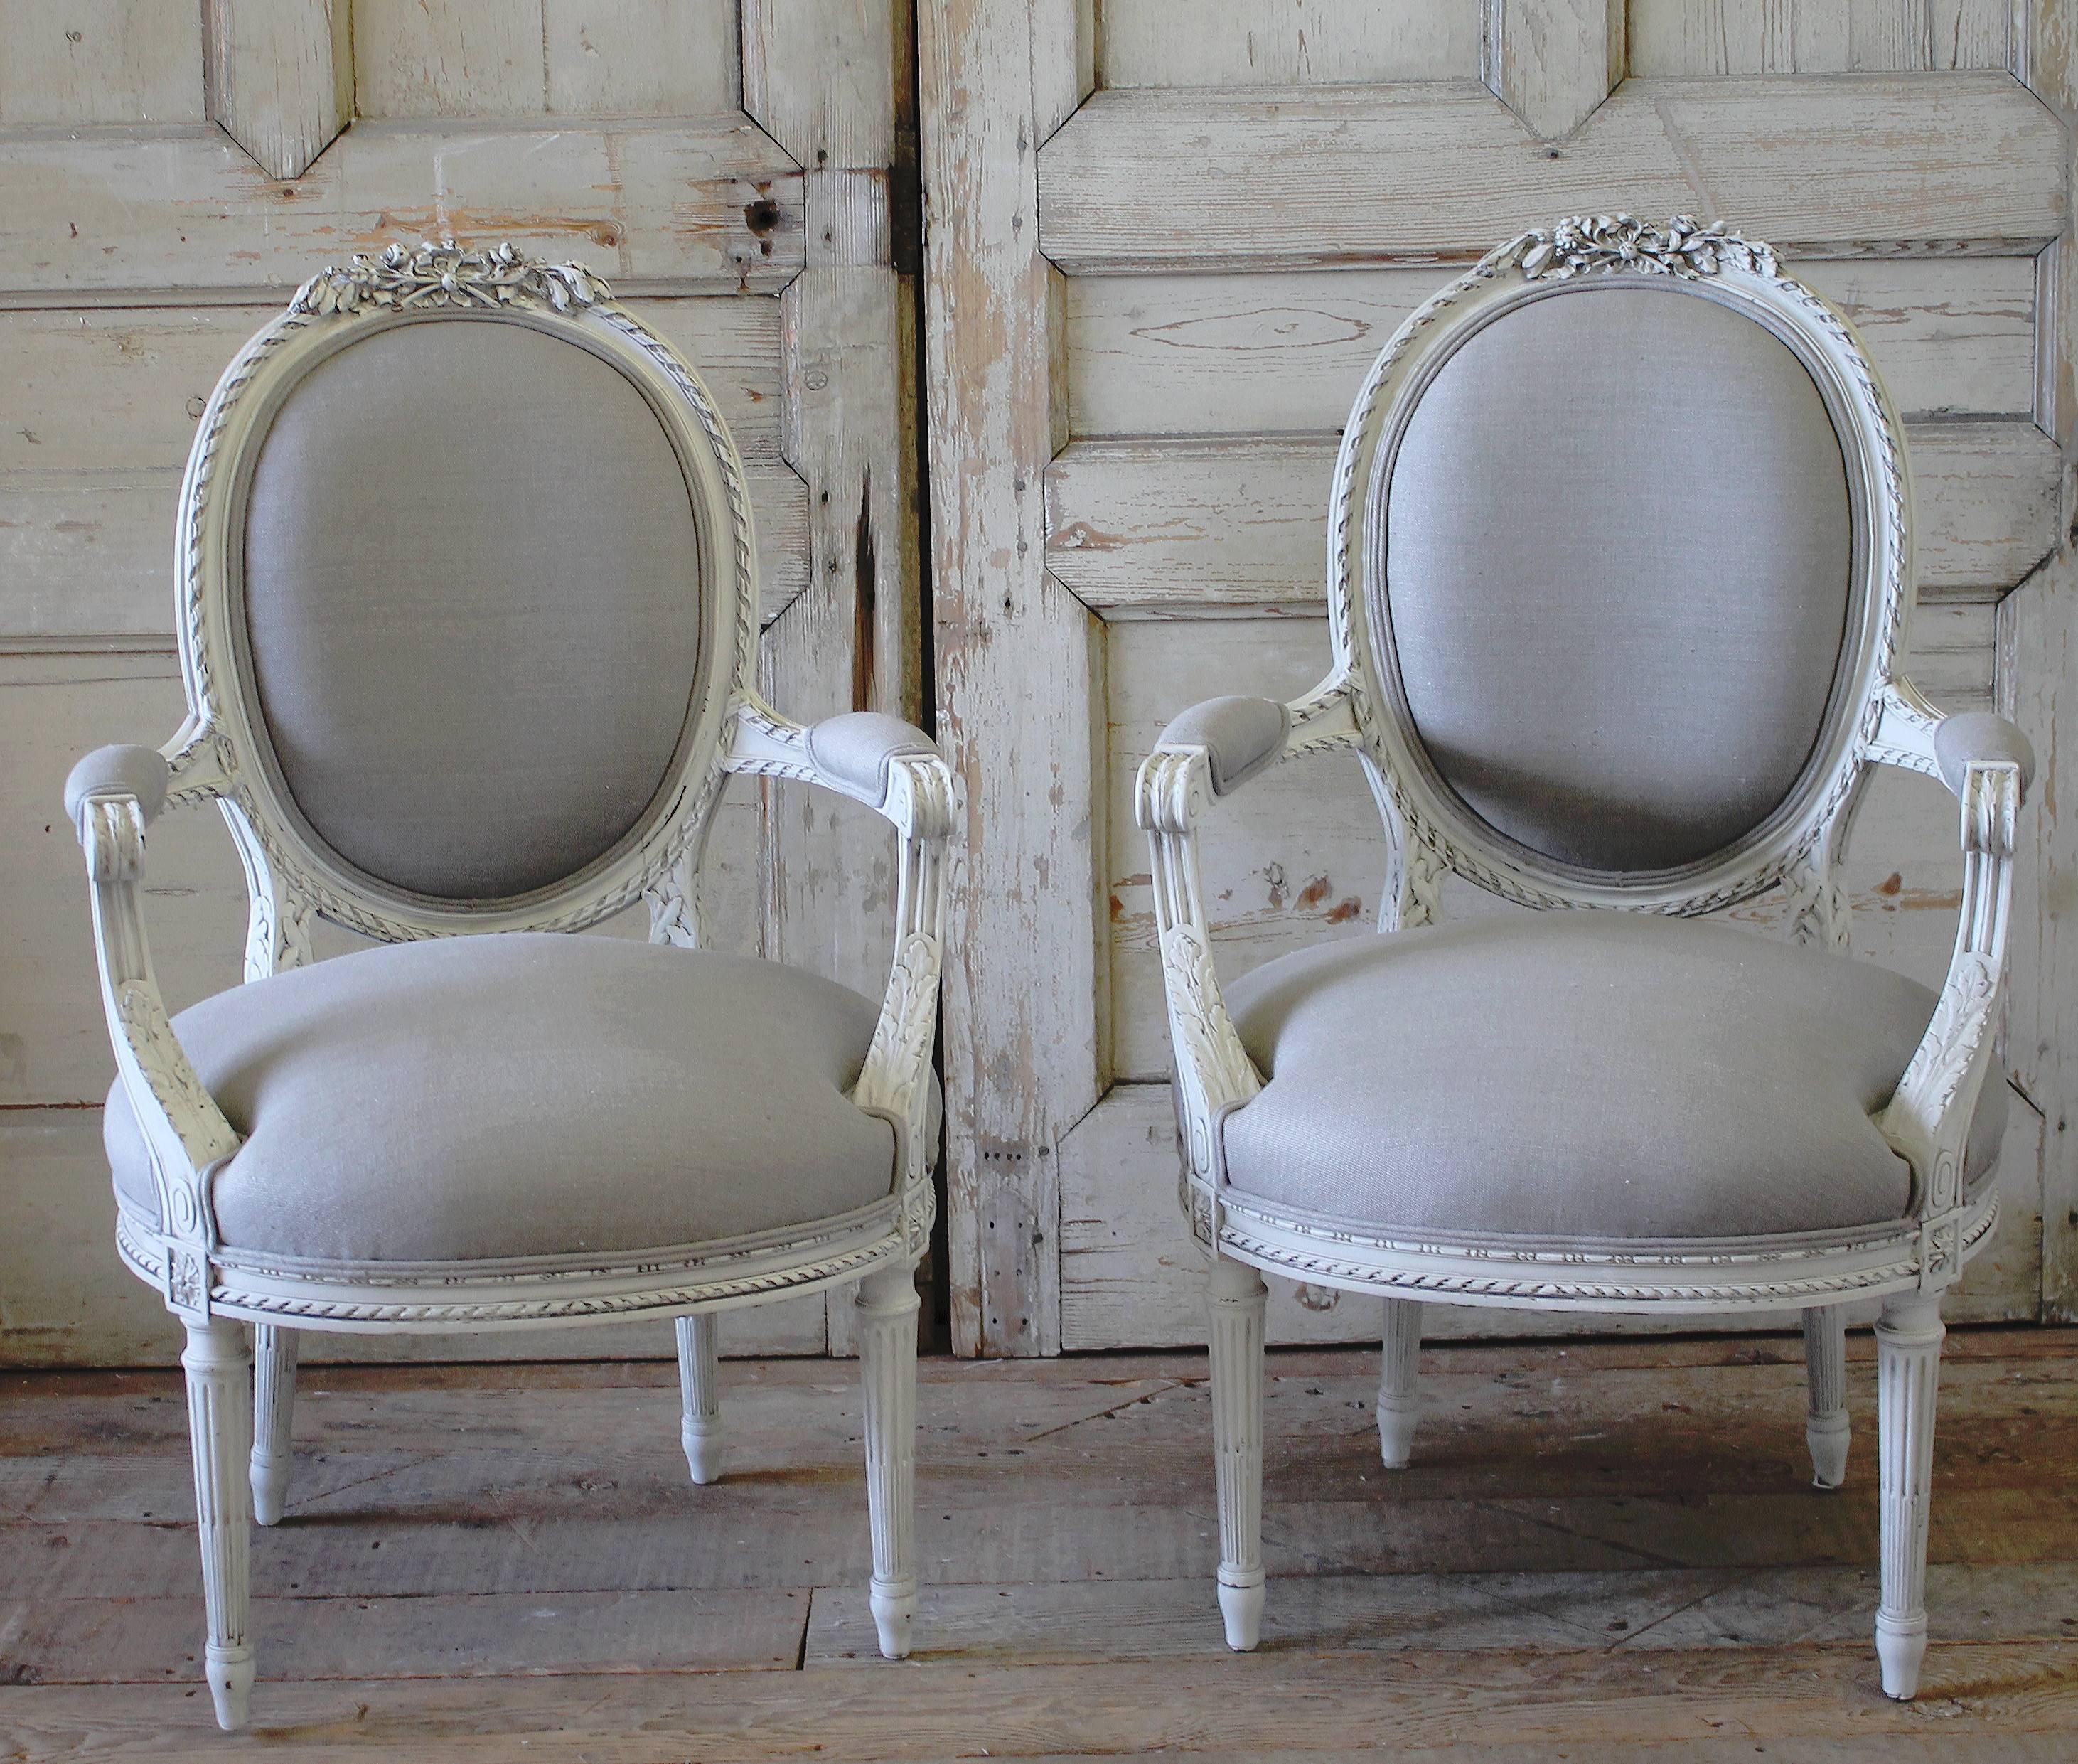 Beautiful carved French open-arm chairs, painted in our signature oyster white finish. Our oyster white is a soft white, with subtle cream and greyish tones. Hand distressed with and antique rubbed glaze finish, to give the look of old original